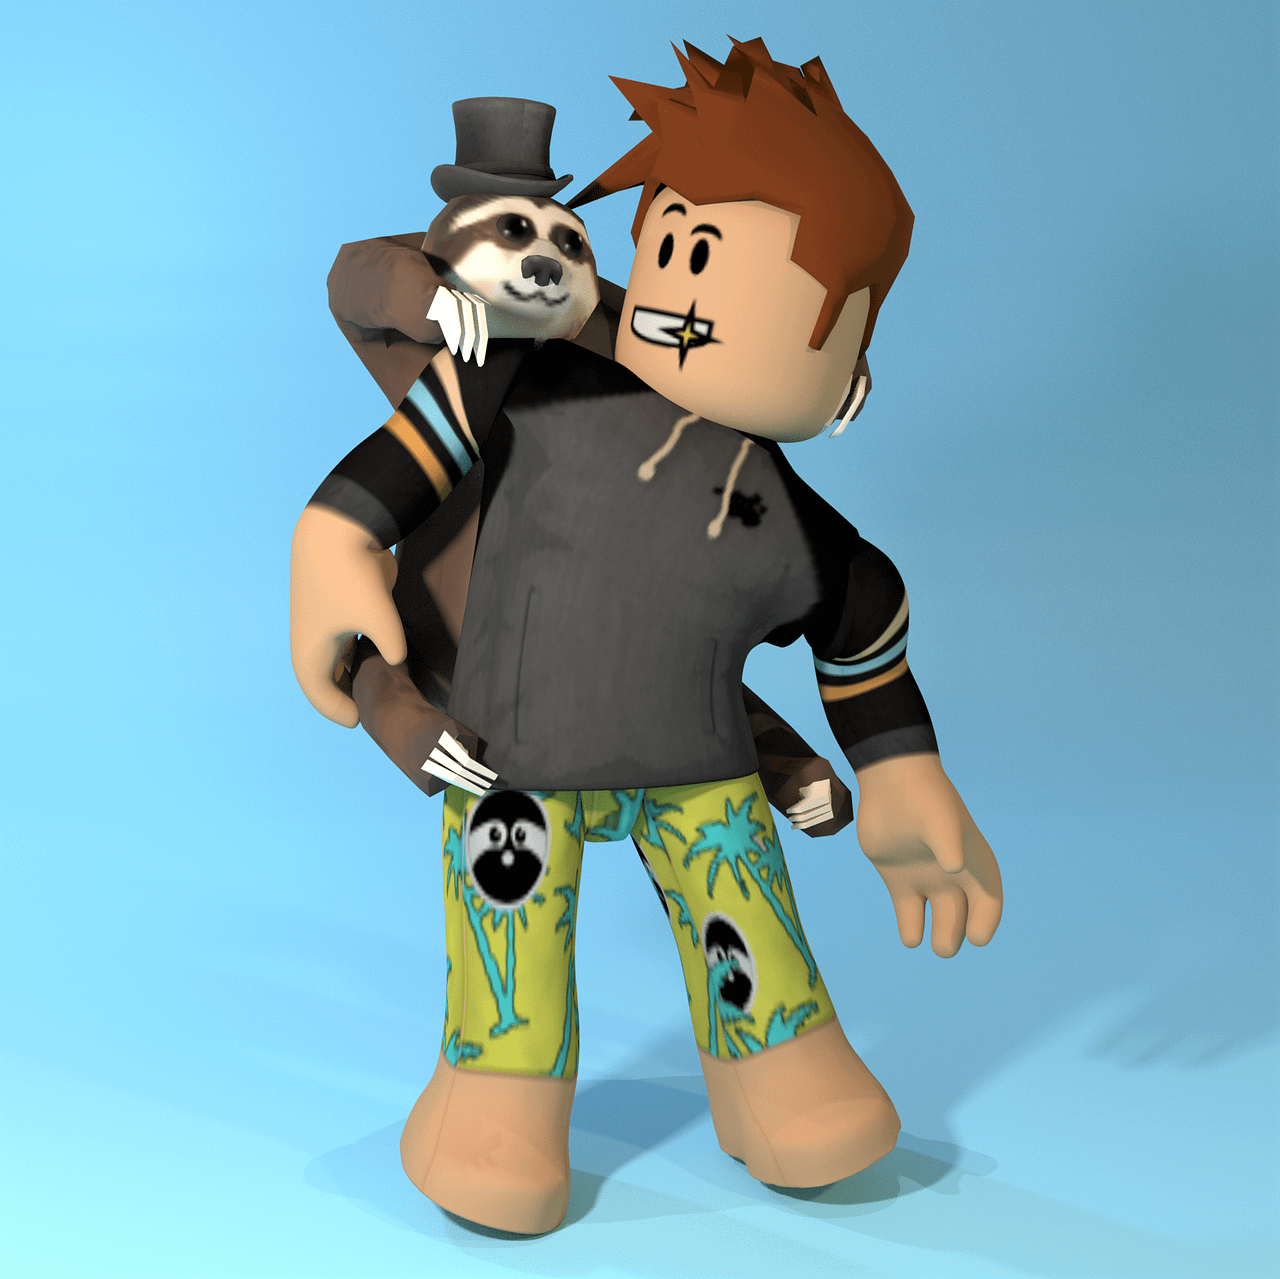 How To Make A Roblox Gfx Scene With Blender Renderguide Com - animated roblox character boy